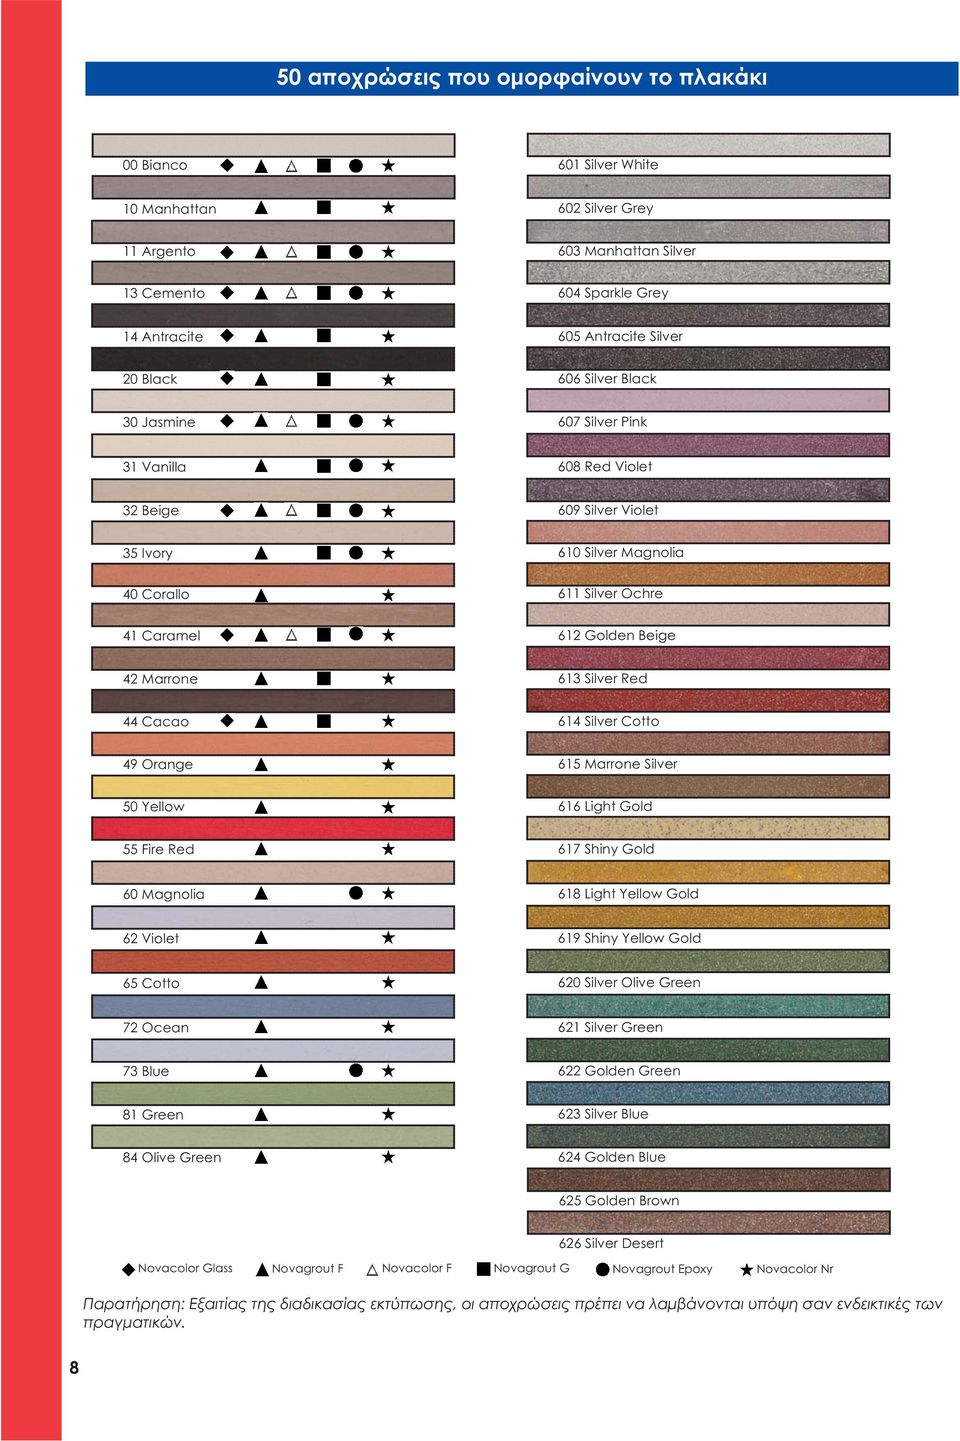 Silver Red 44 Cacao 614 Silver Cotto 49 Orange 615 Marrone Silver 50 Yellow 616 Light Gold 55 Fire Red 617 Shiny Gold 60 Magnolia 618 Light Yellow Gold 62 Violet 619 Shiny Yellow Gold 65 Cotto 620